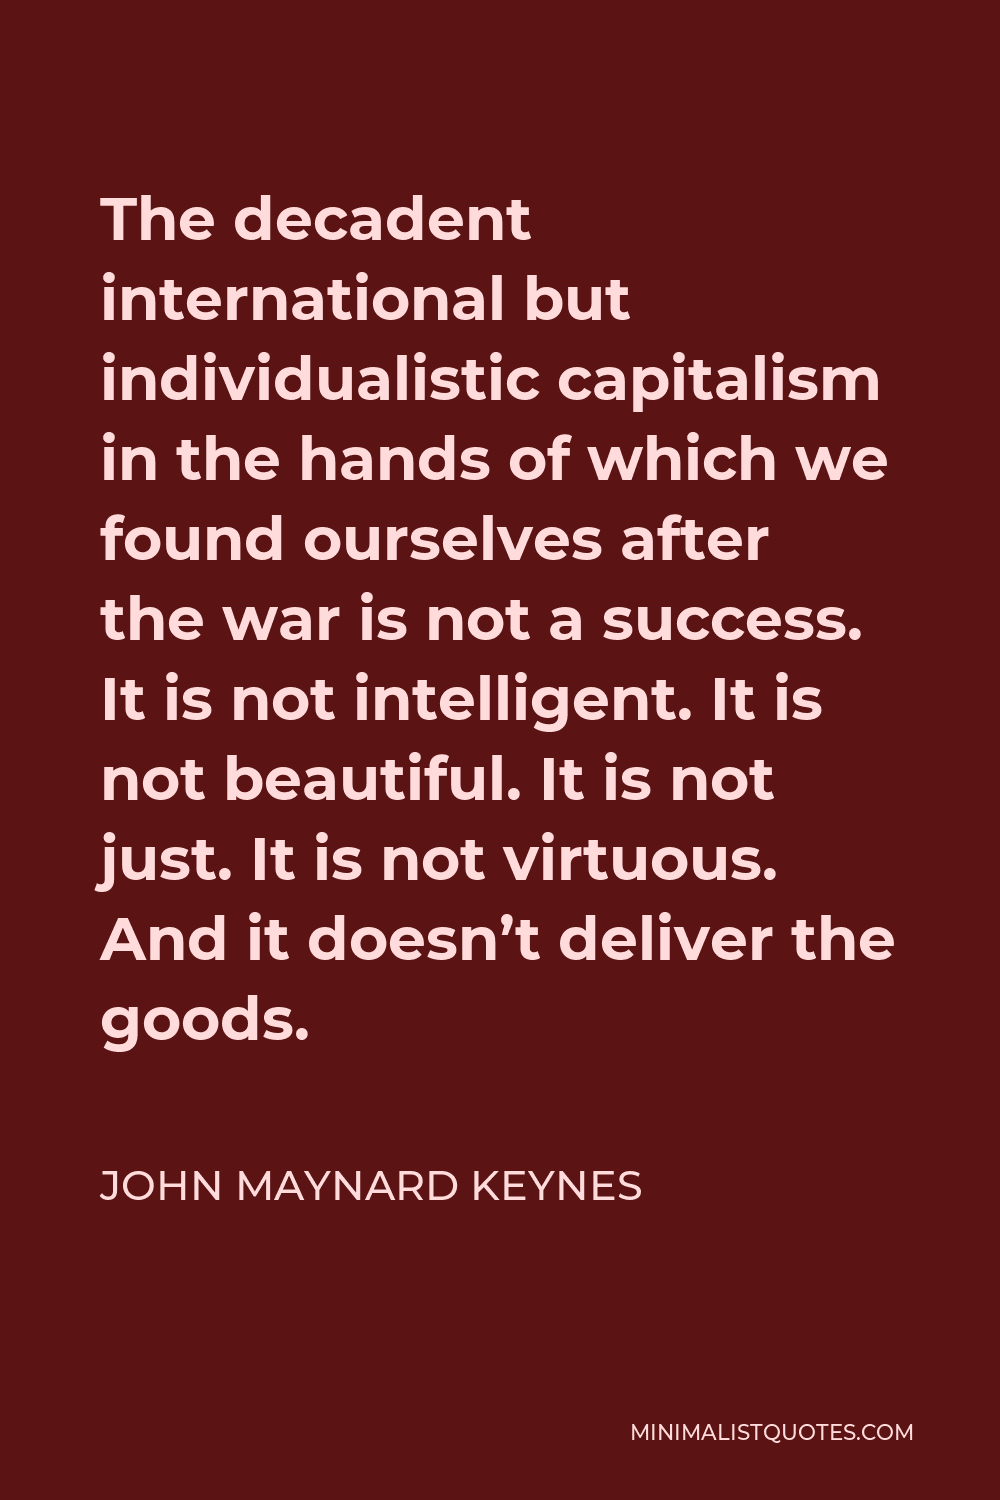 John Maynard Keynes Quote - The decadent international but individualistic capitalism in the hands of which we found ourselves after the war is not a success. It is not intelligent. It is not beautiful. It is not just. It is not virtuous. And it doesn’t deliver the goods.